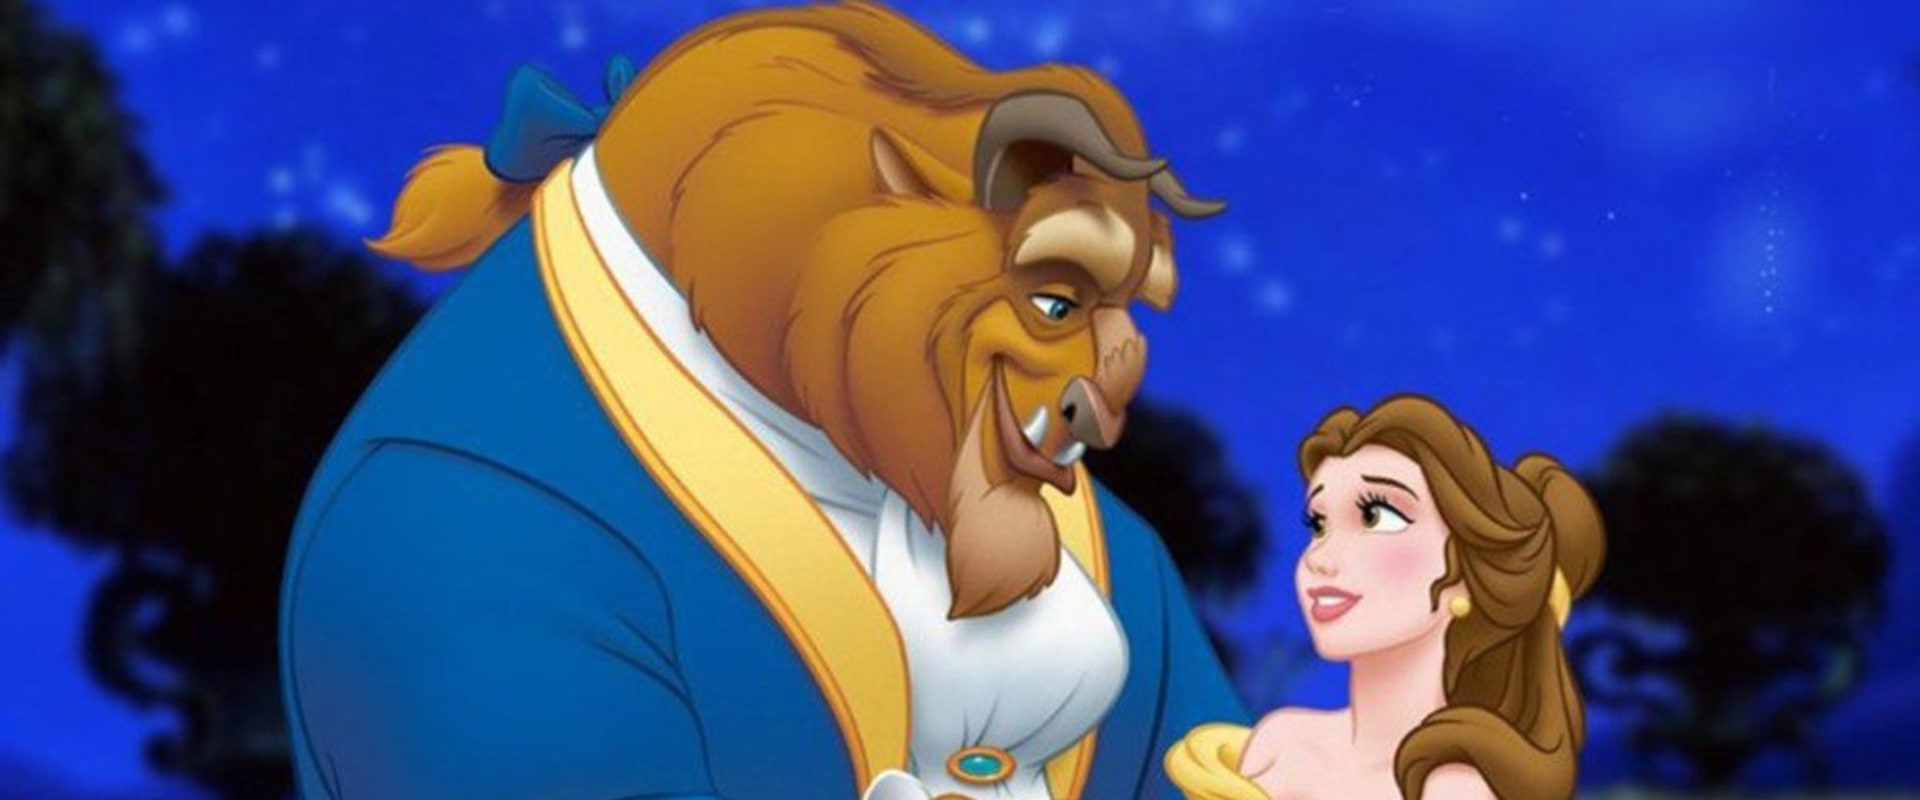 The Most Popular Animated Movies of All Time